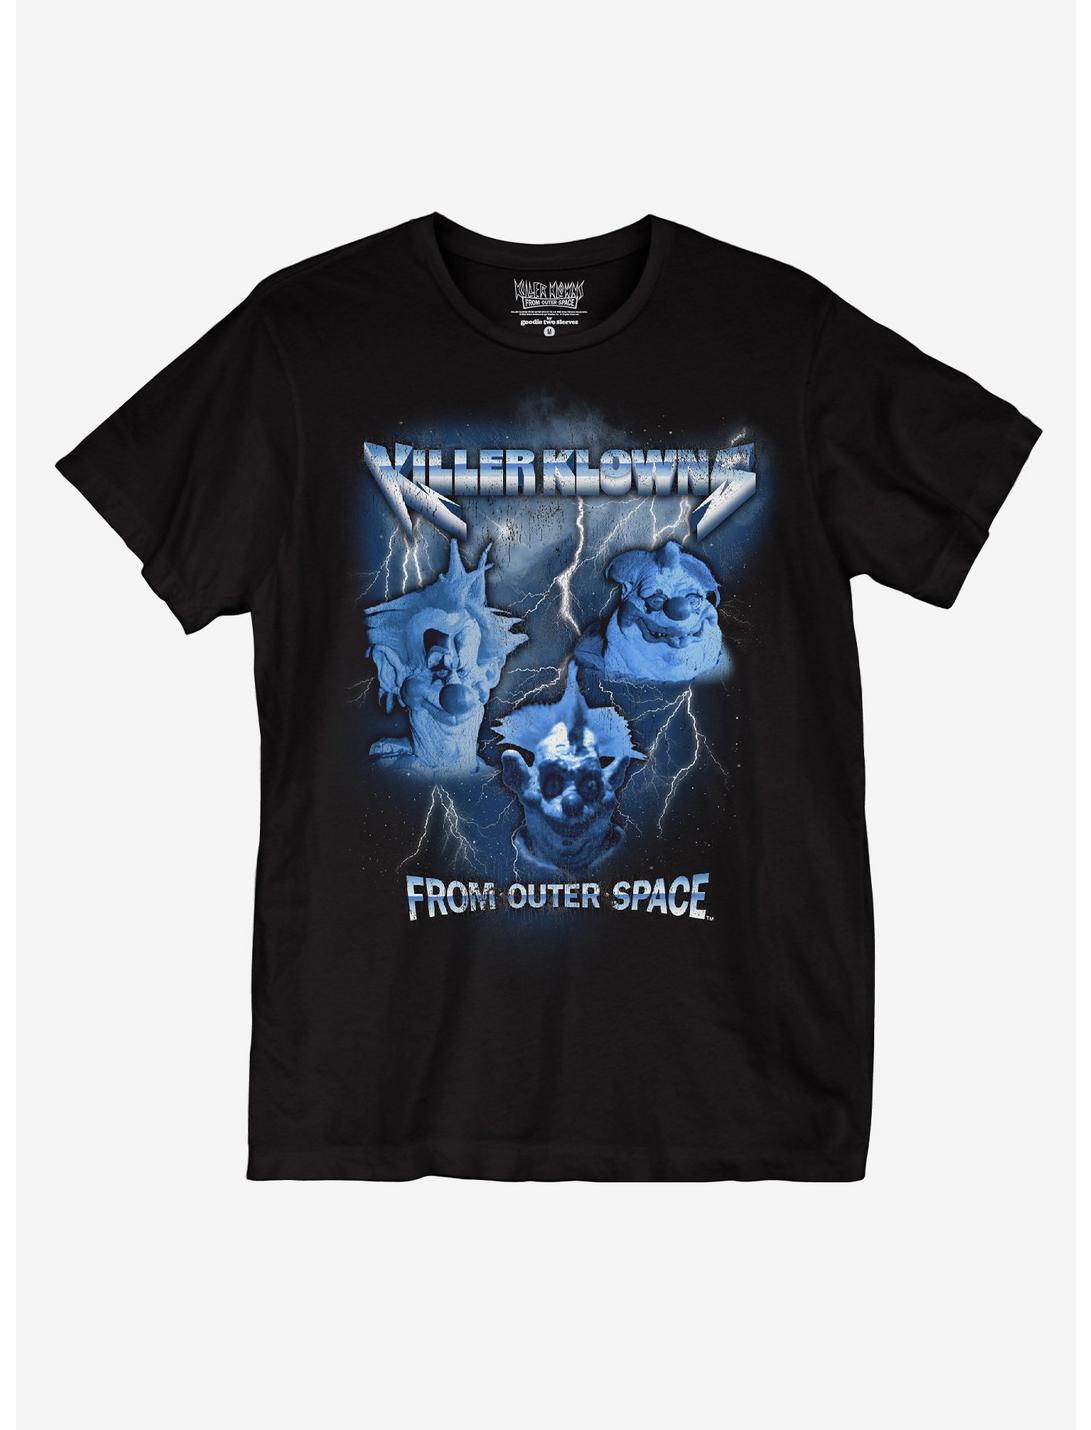 Killer Klowns From Outer Space Metal T-Shirt, BLACK, hi-res